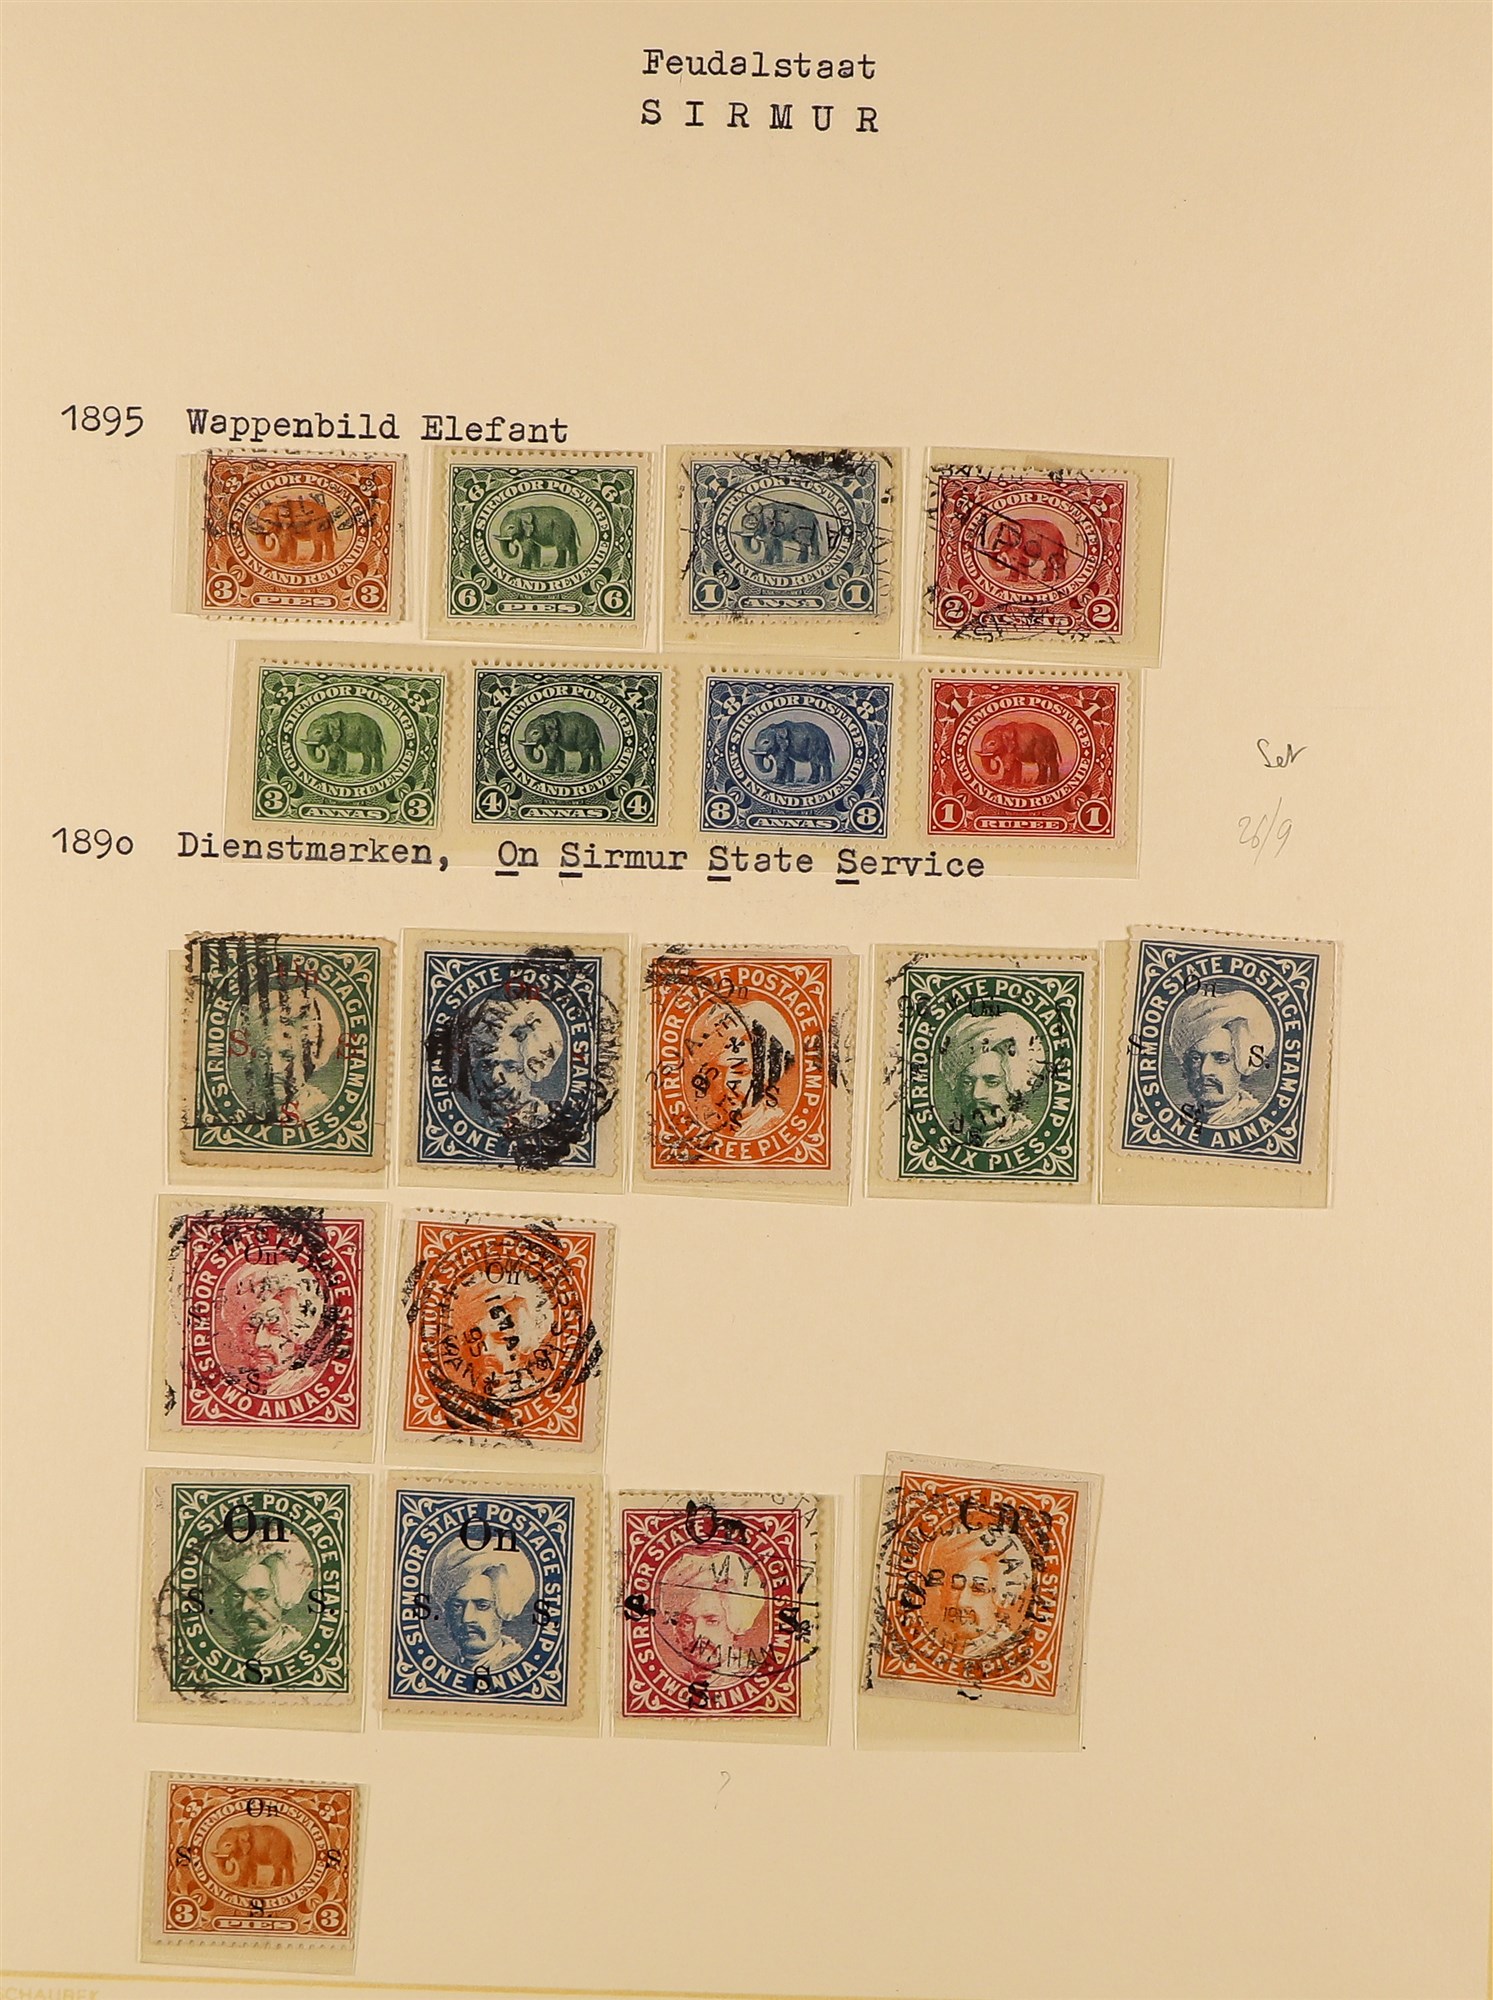 INDIAN FEUDATORY STATES SIRMOOR 1878 - 1899 mint and used collection of 35 stamps on album pages, - Image 2 of 2